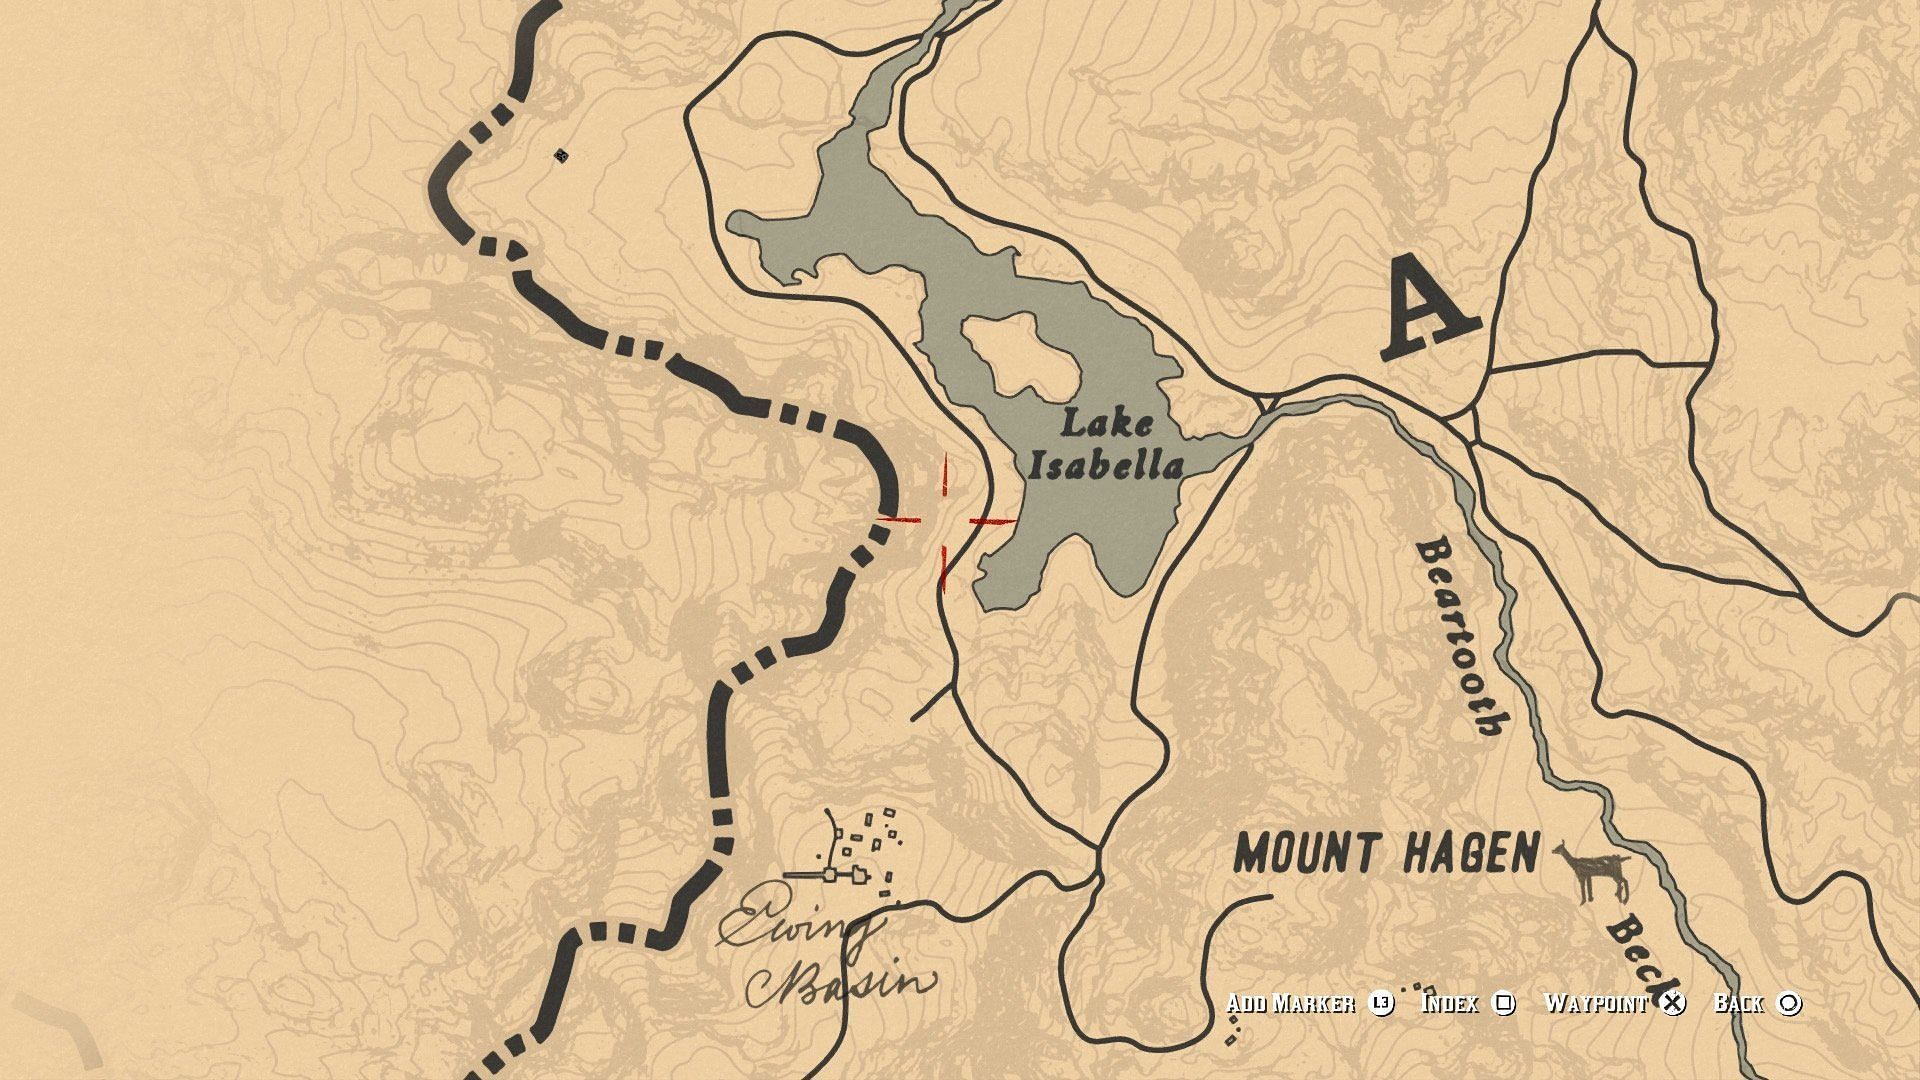 Best place to find the Arabian Horse (Image via Rockstar Games)